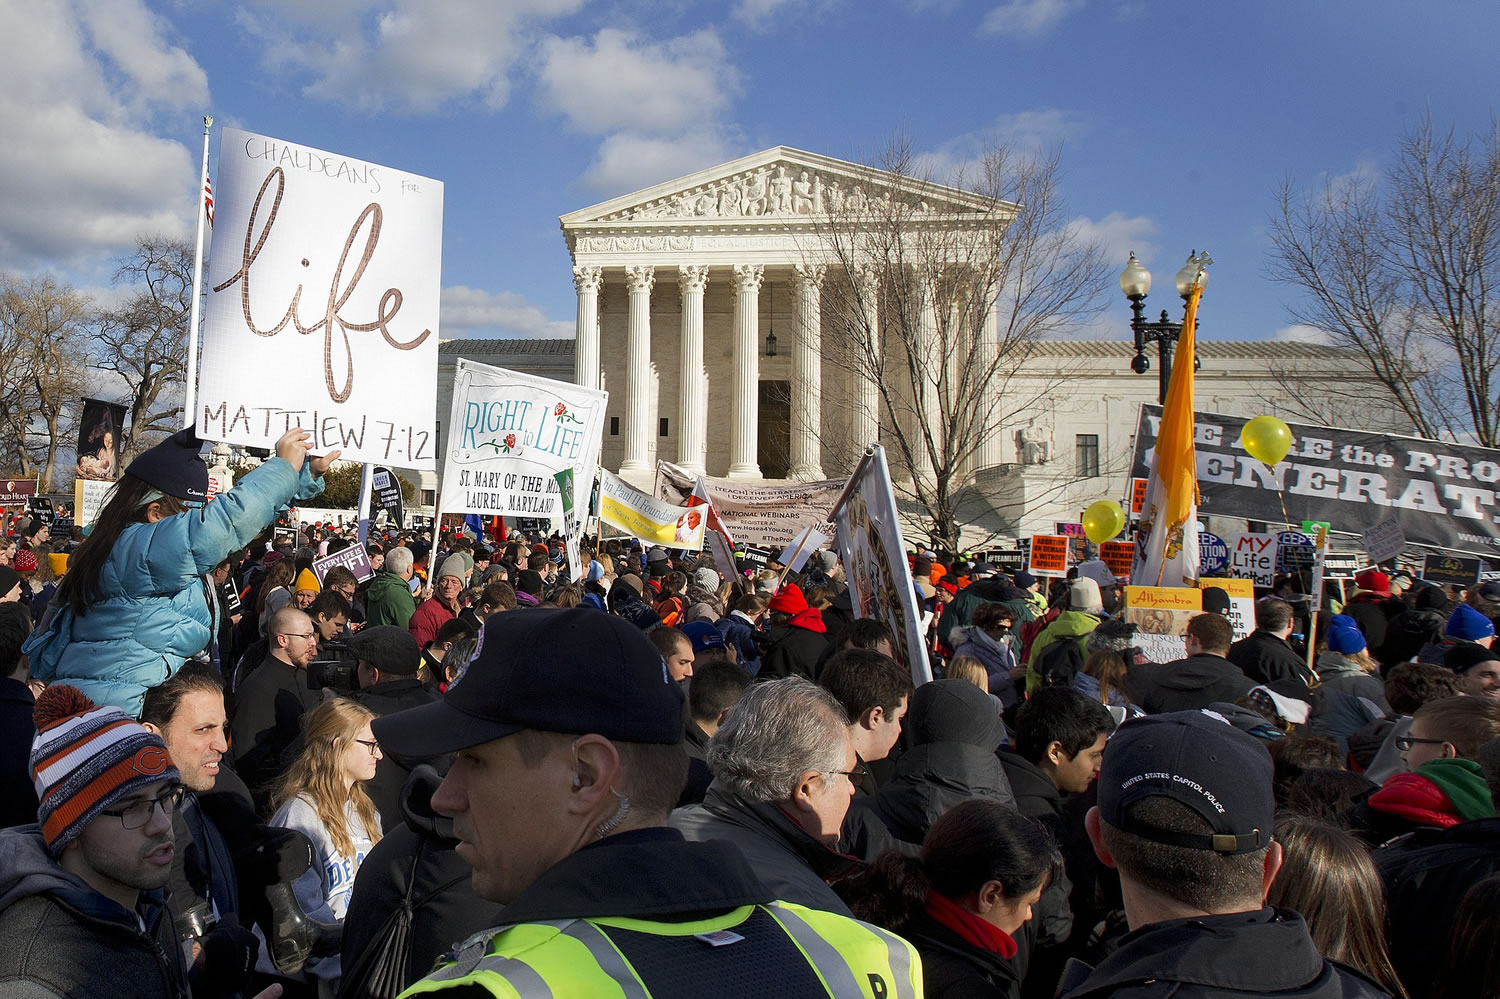 Anti-abortion demonstrators march past the Supreme Court in Washington, Thursday, Jan. 22, 2015, during the annual March for Life. Thousands of anti-abortion demonstrators are gathering in Washington for an annual march to protest the Supreme Court's landmark 1973 decision that declared a constitutional right to abortion.